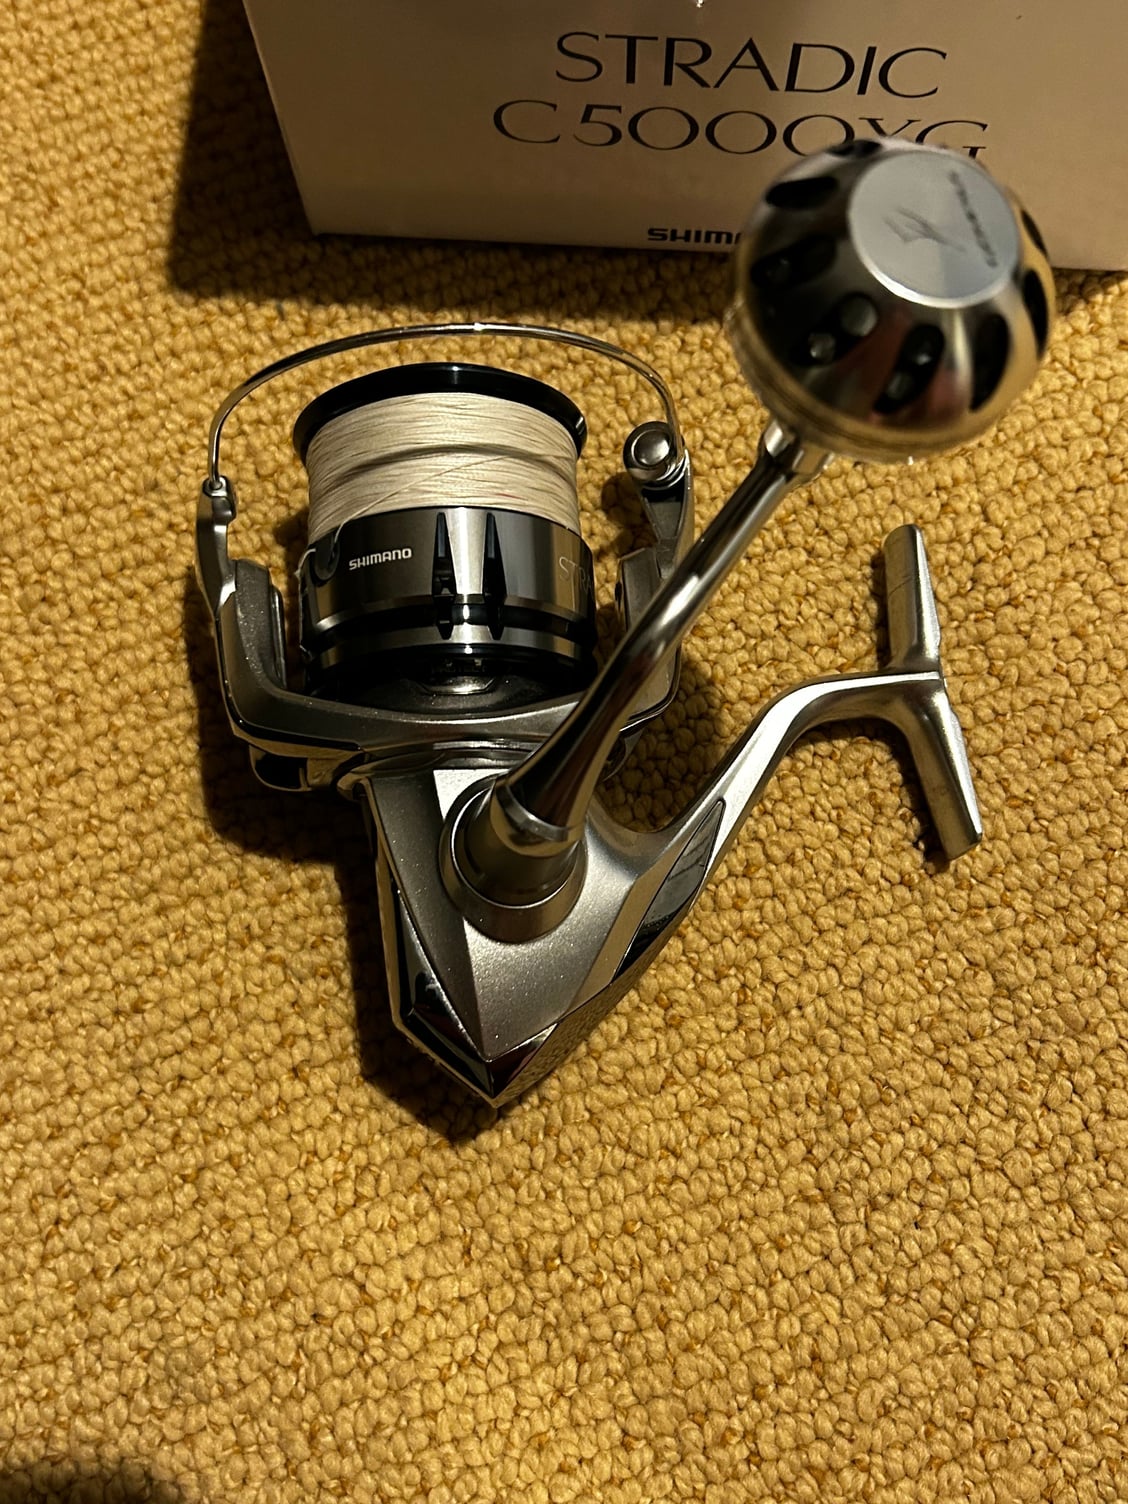 WTS Shimano Stradic C5000XG - The Hull Truth - Boating and Fishing Forum